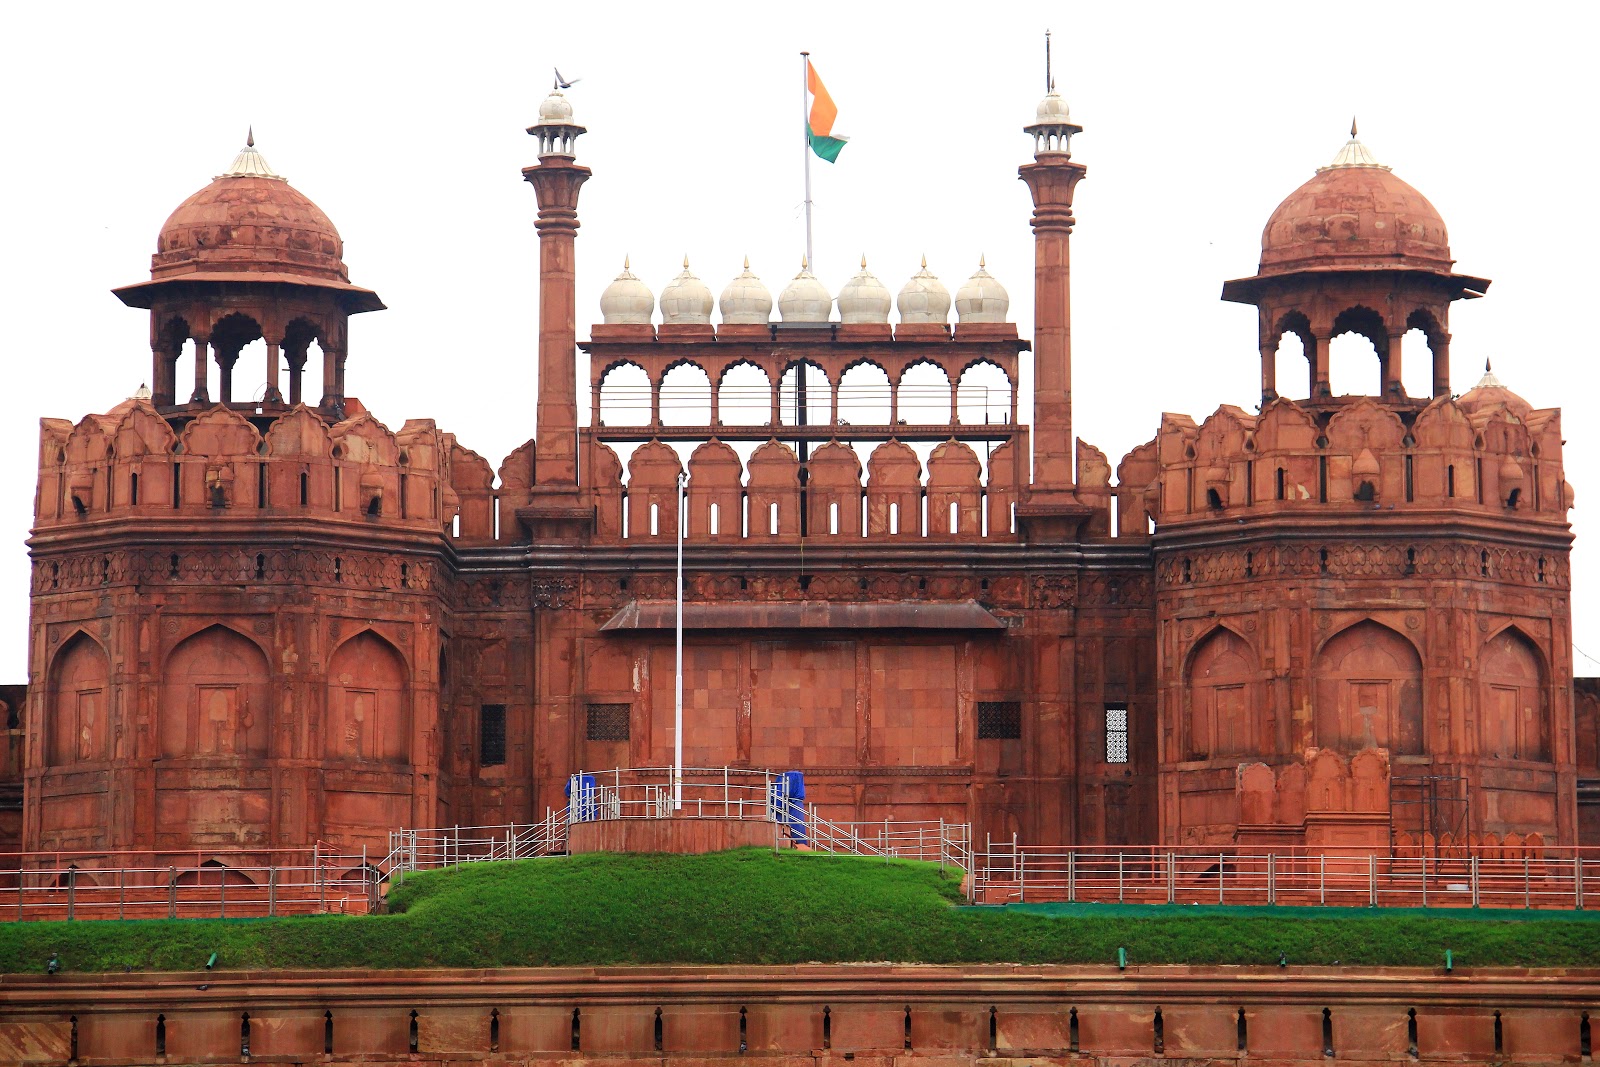 Old Monuments are Delhi's pride and Glory - India Travel Blog